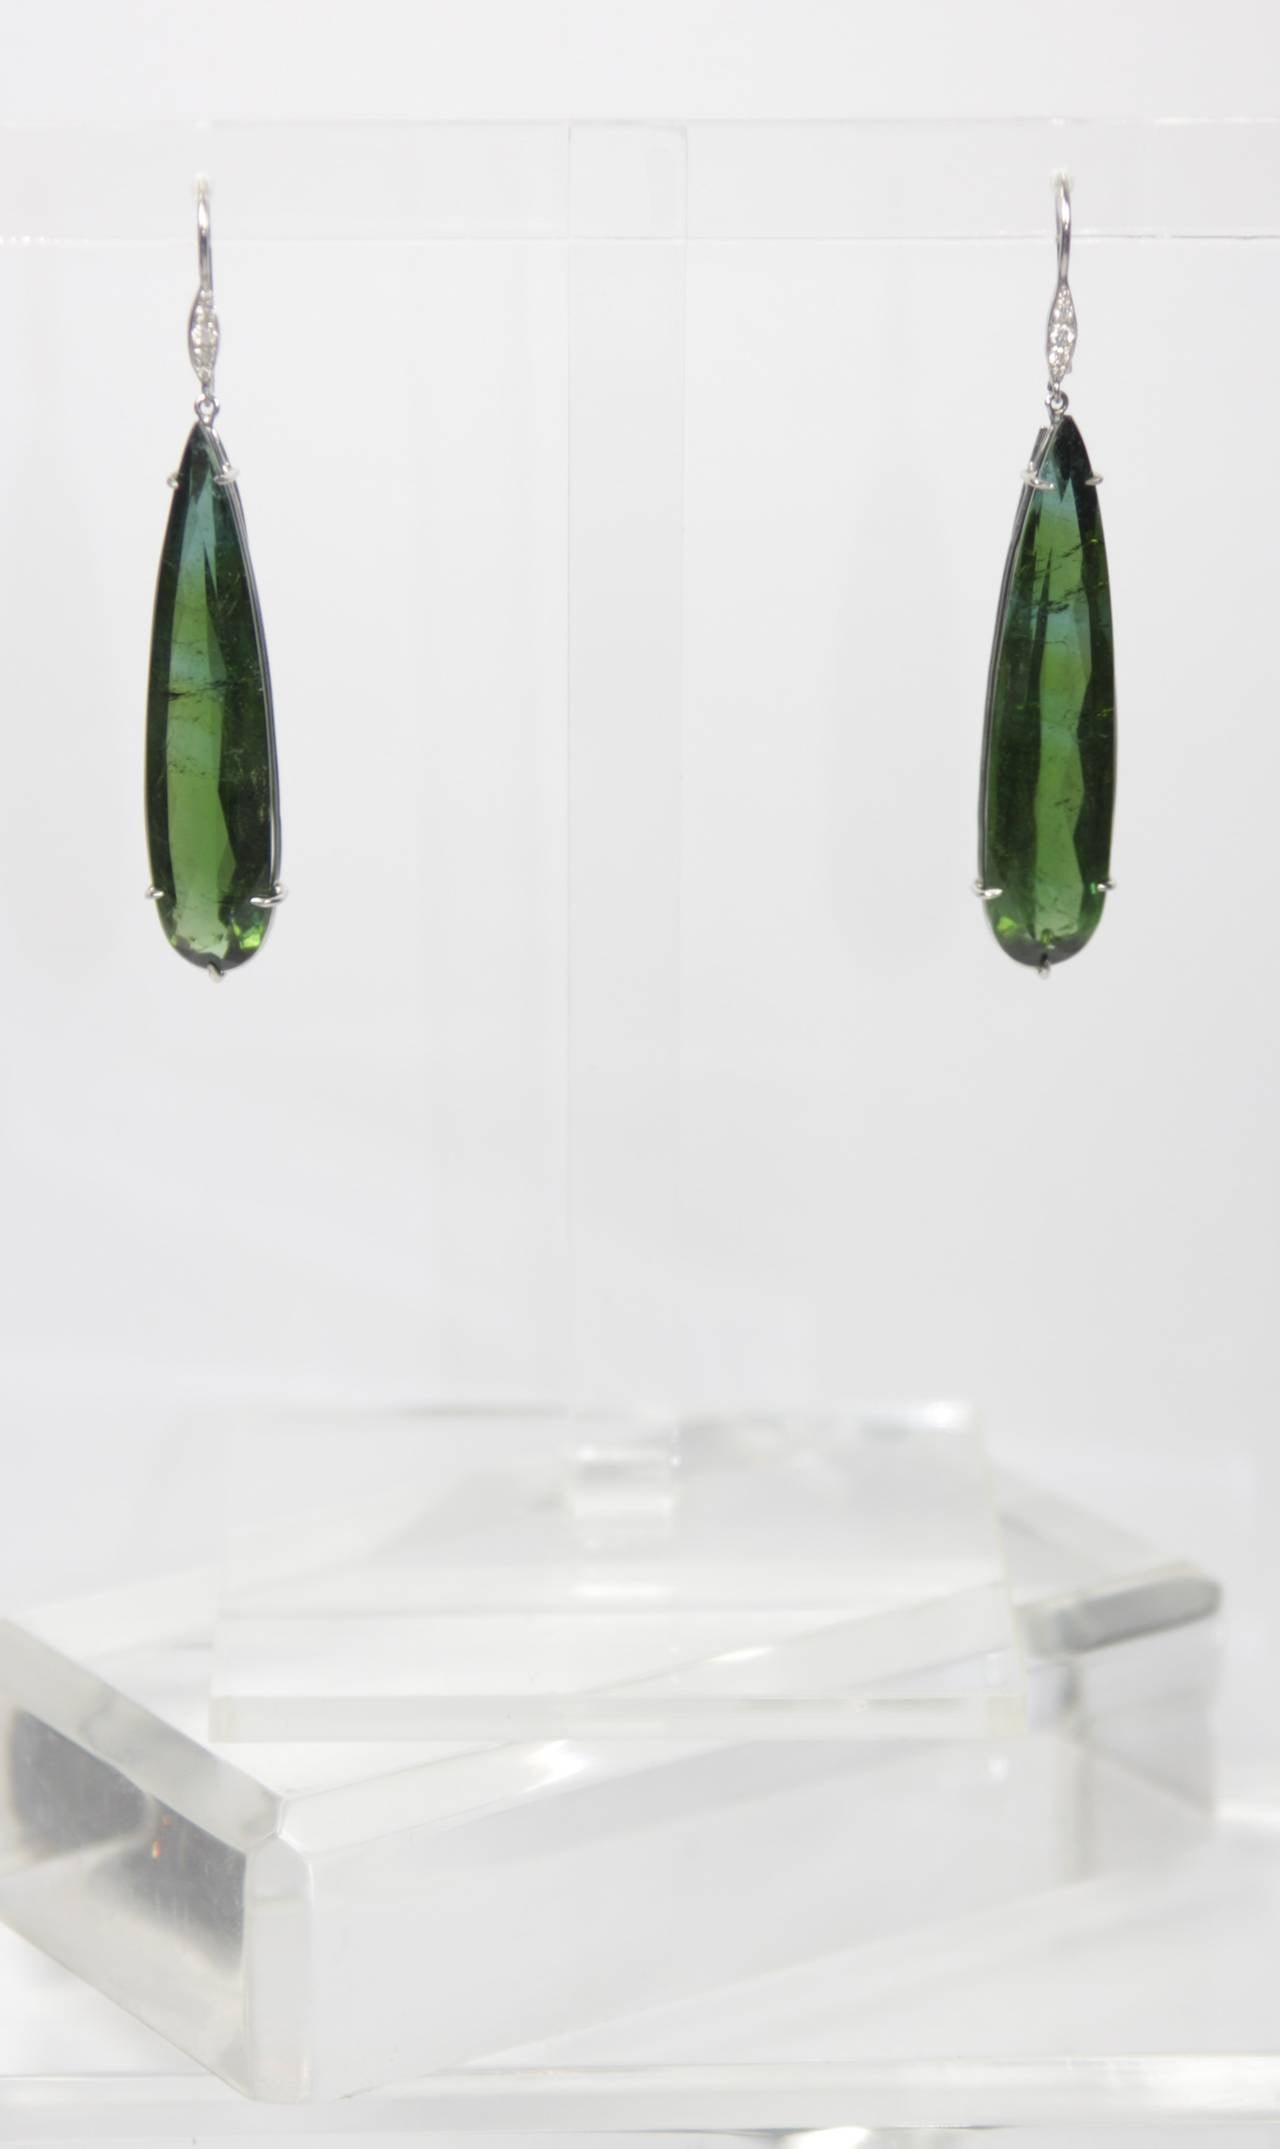 These earrings are available through The Paper Bag Princess of Beverly Hills. Please feel free to contact us with any inquiries you may have. 

These earrings are composed of a green hued tourmaline with slight variations of blue, while set in a